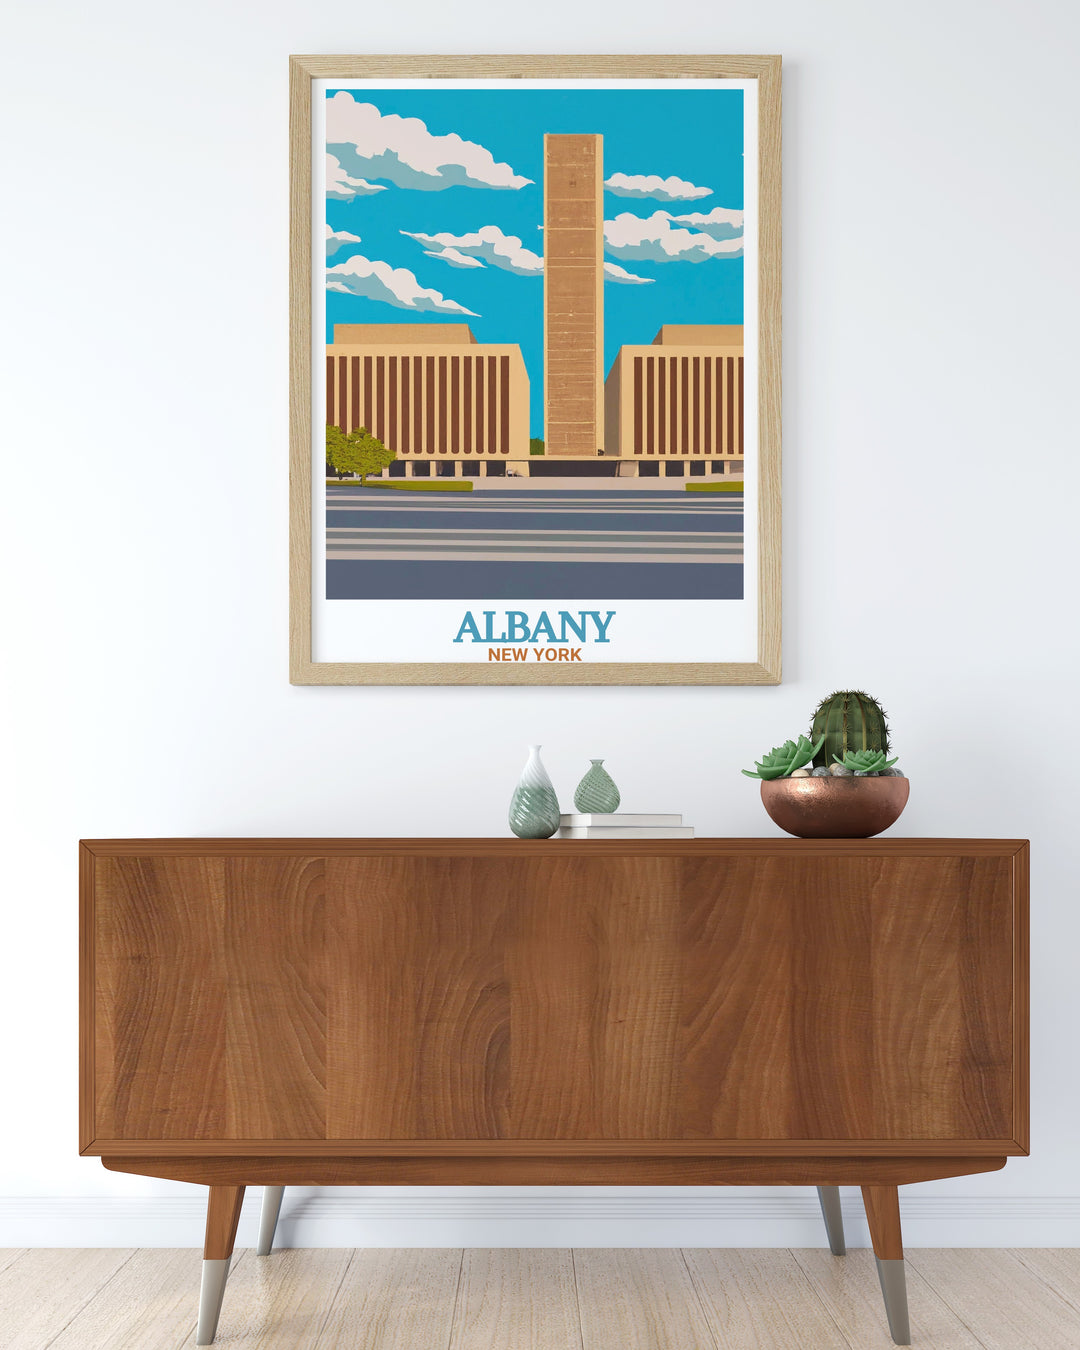 Vibrant Empire State Plaza poster capturing the cultural significance of Albany making it a perfect addition to any collection of New York State prints and art collectibles suitable for both modern and vintage decor styles.